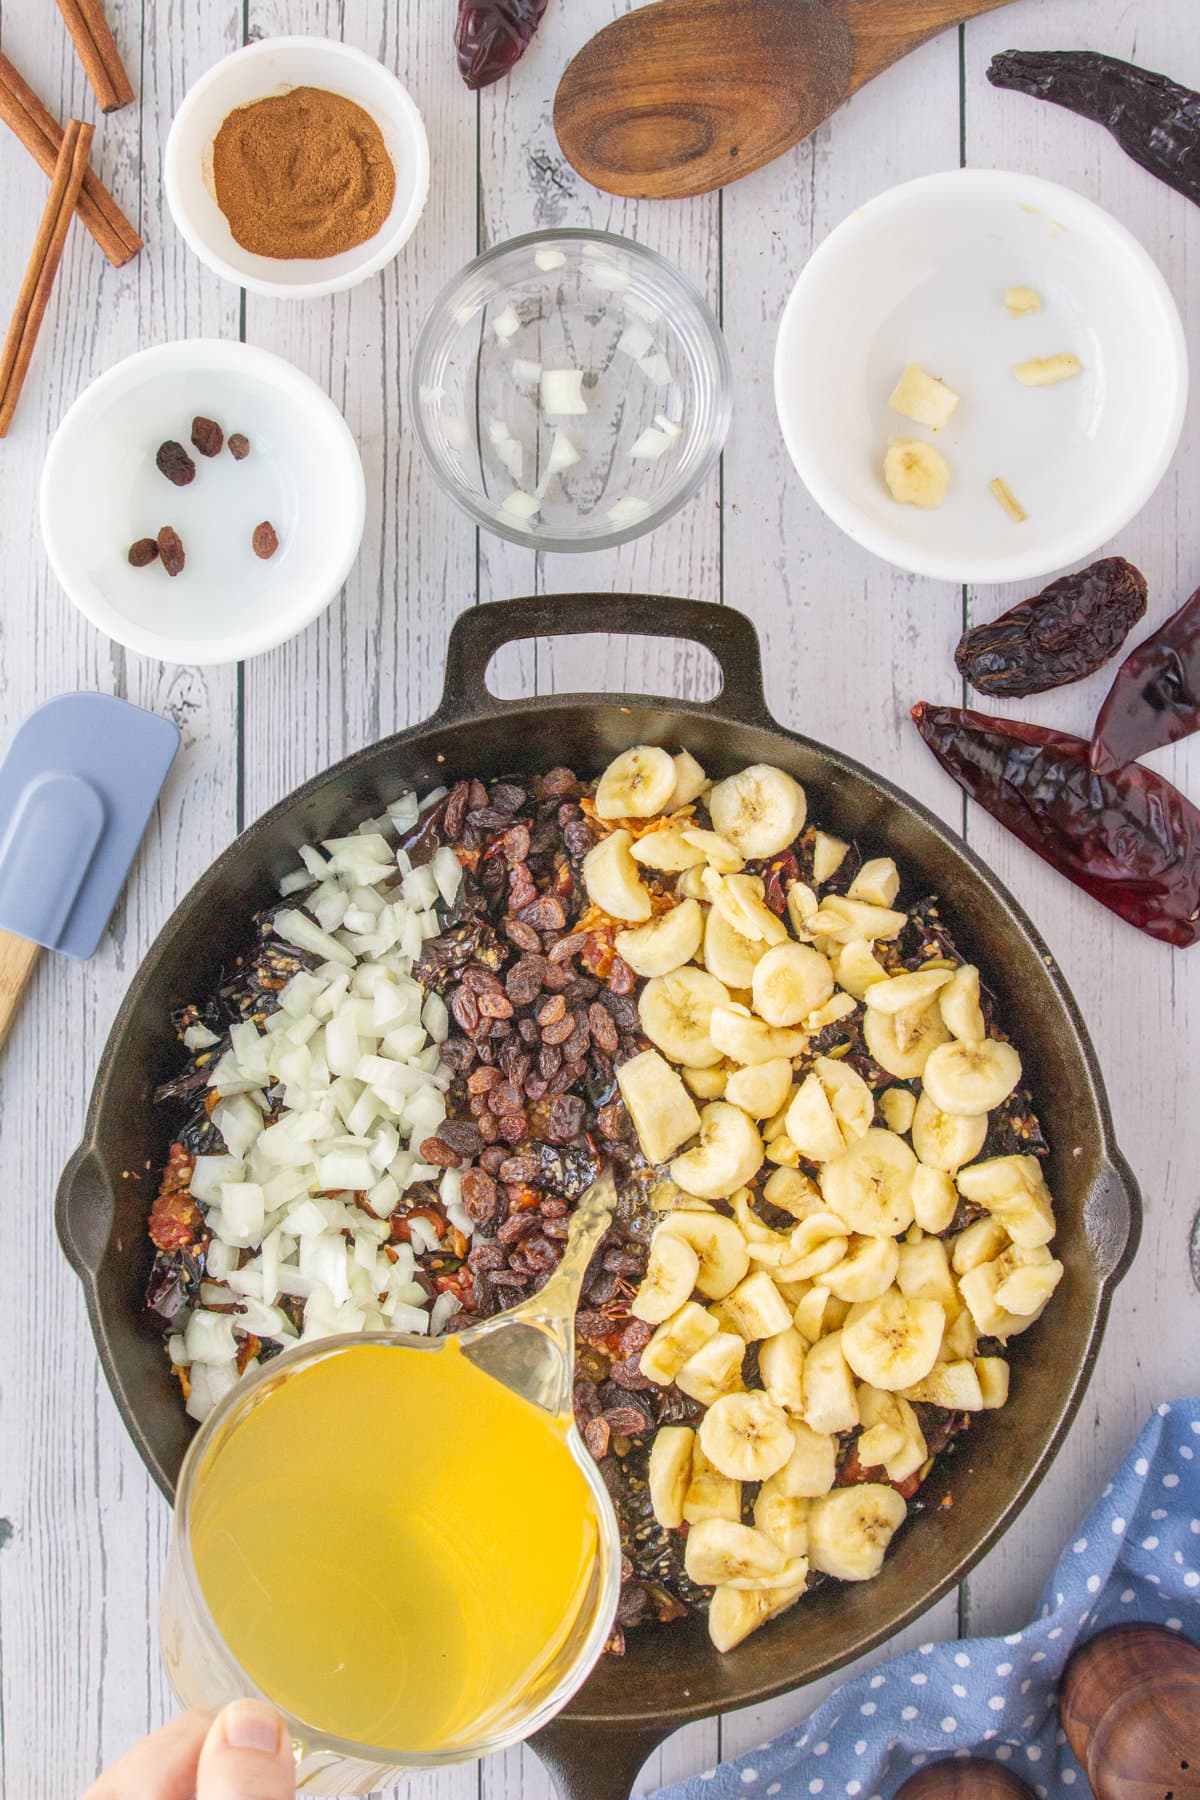 A cup pourig chicken stock into the skillet. bananas, raisins, and onions have been added.